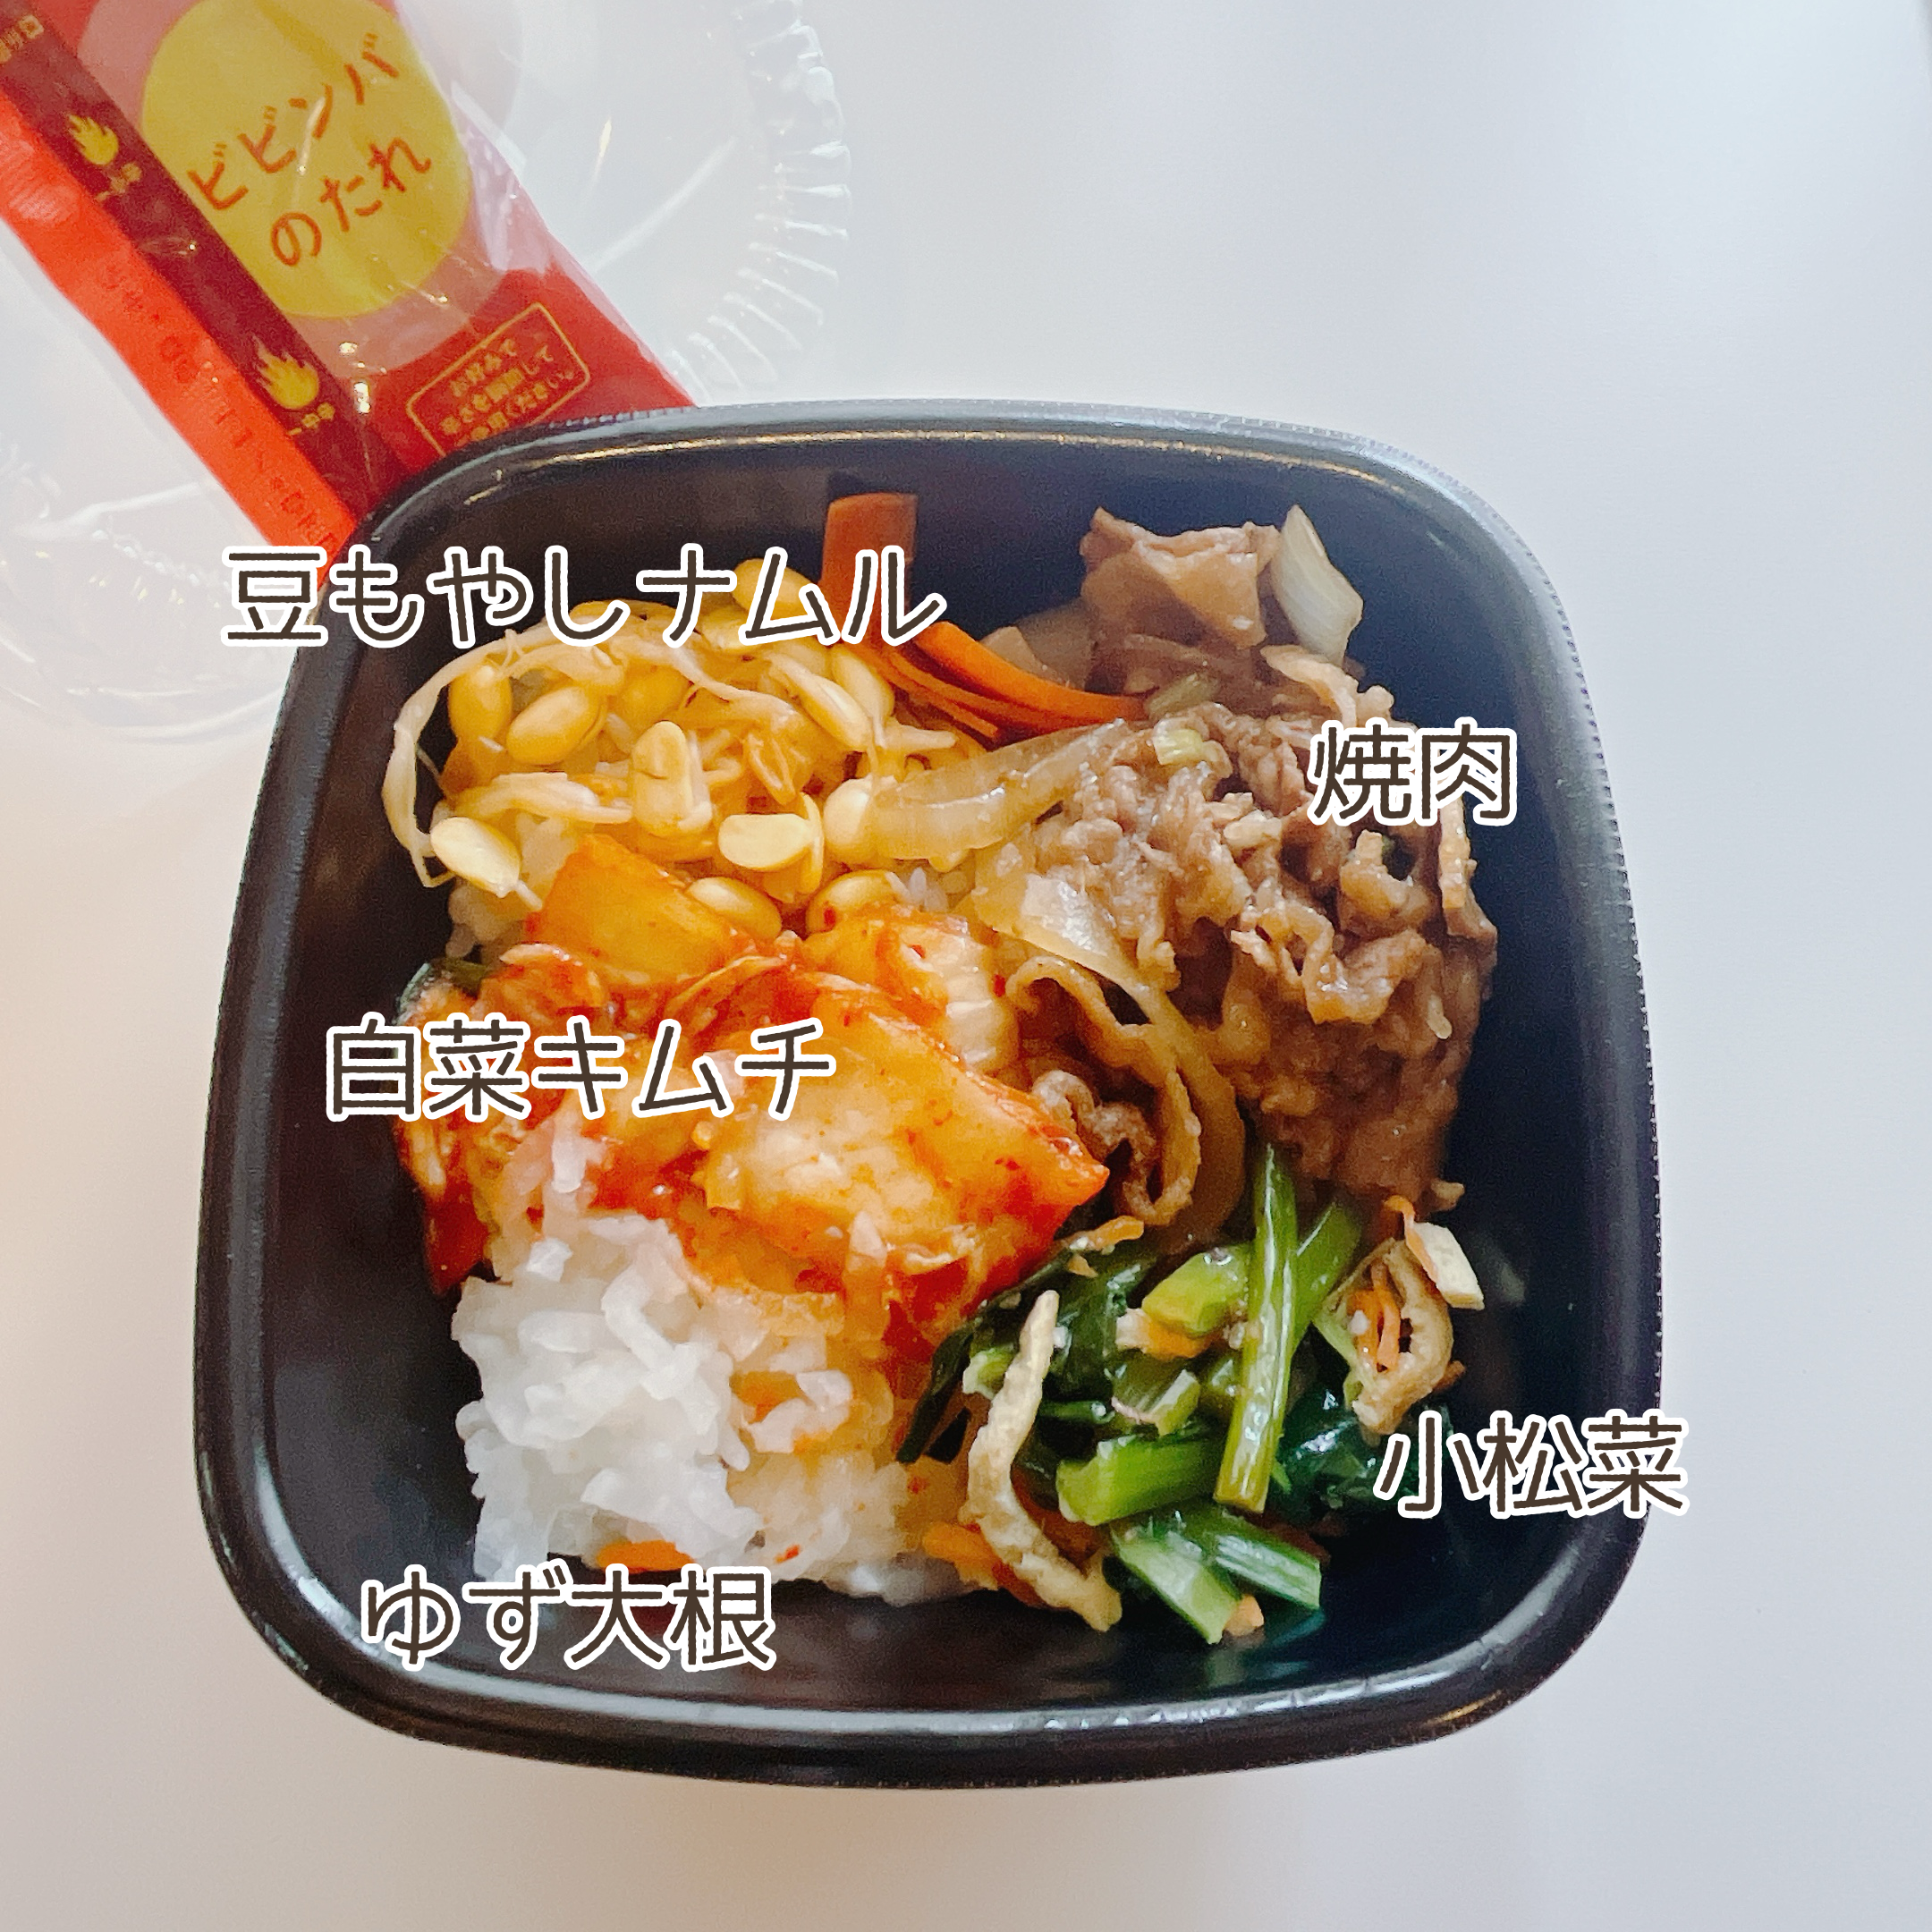 Top view of a bento box with rice, beef, noodles, and vegetables, accompanied by a drink. Text labels in Japanese